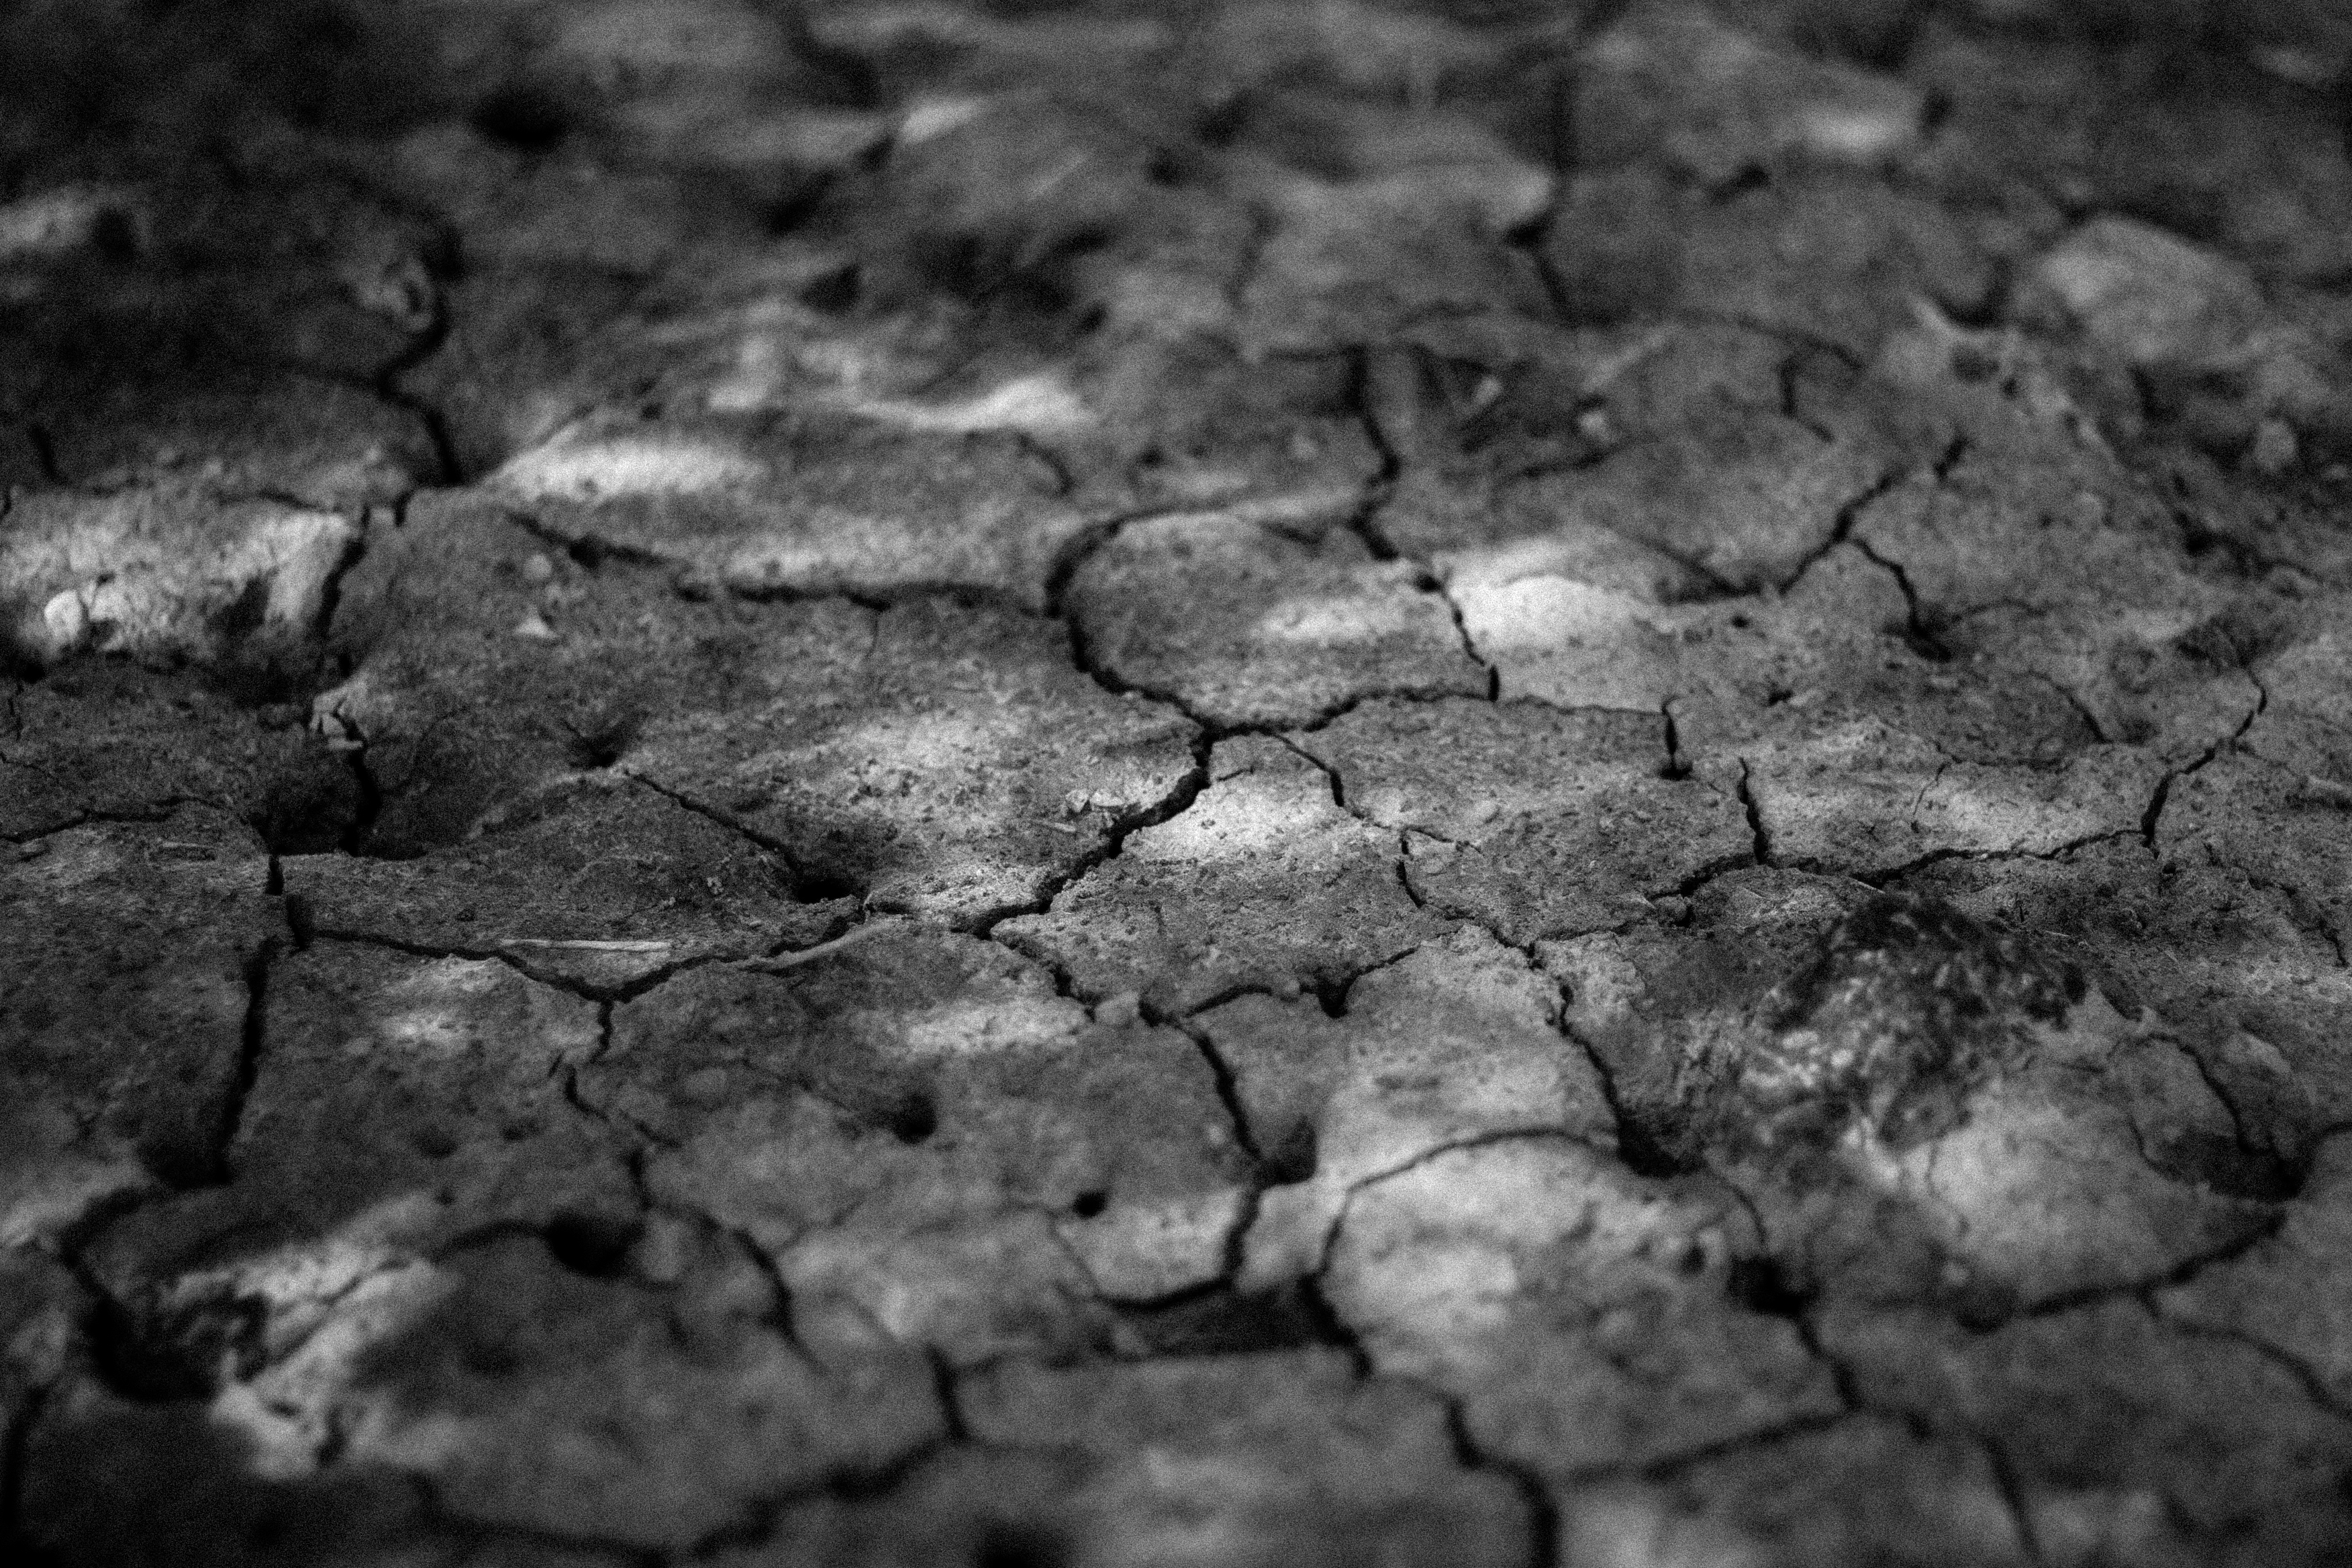 cracked earth / ground on dry river bed